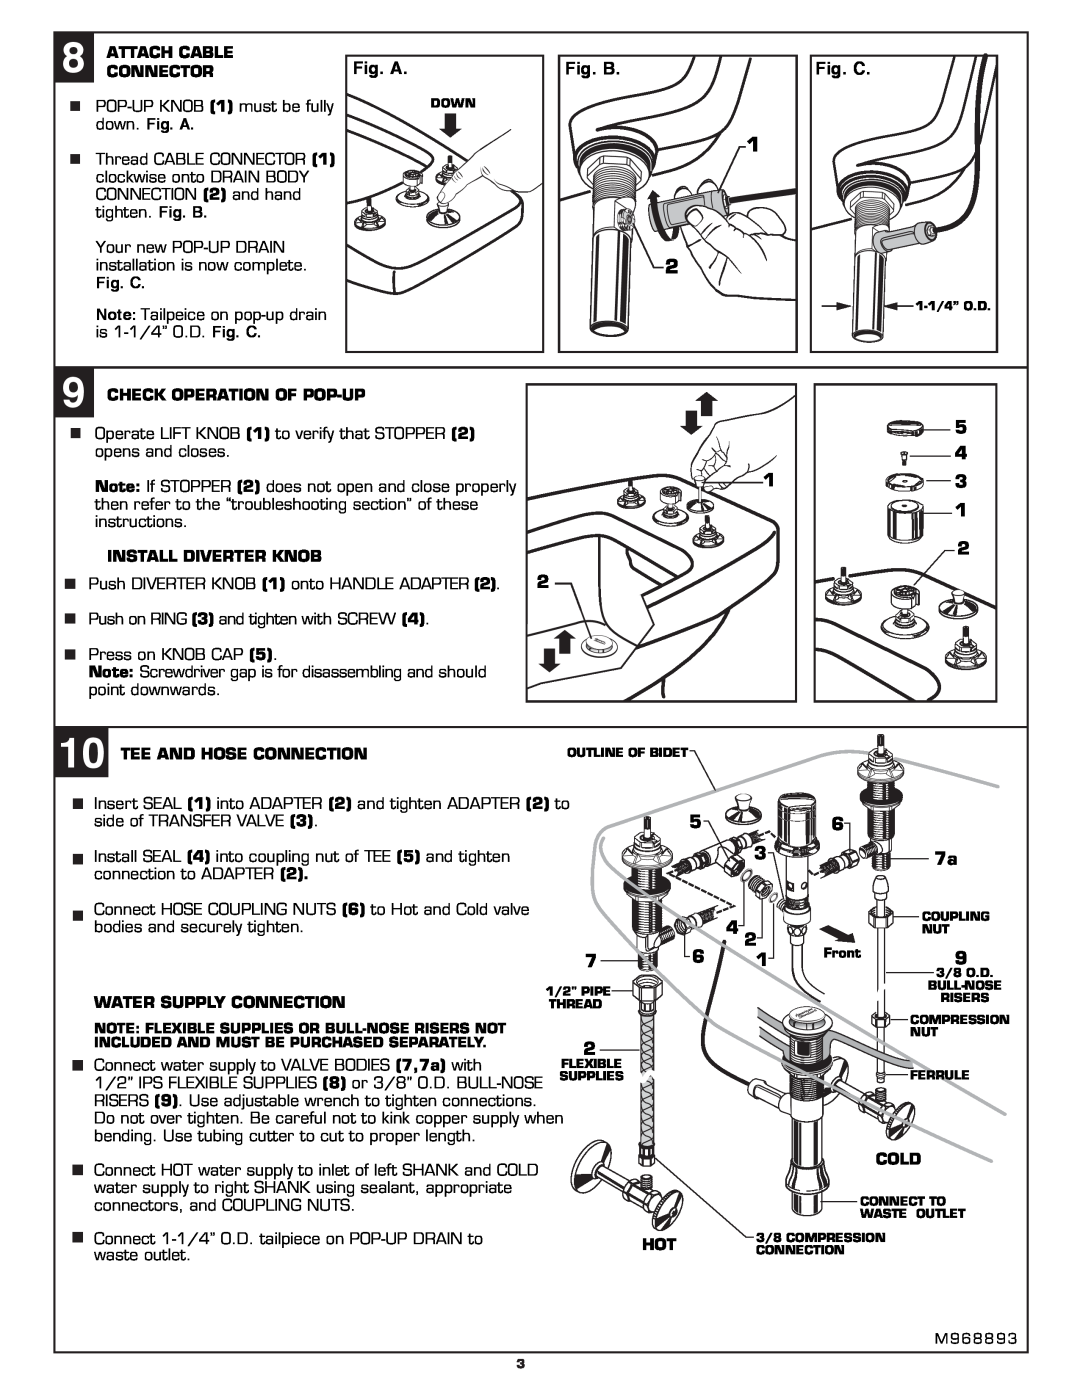 American Standard 7038.400 installation instructions Fig. A 